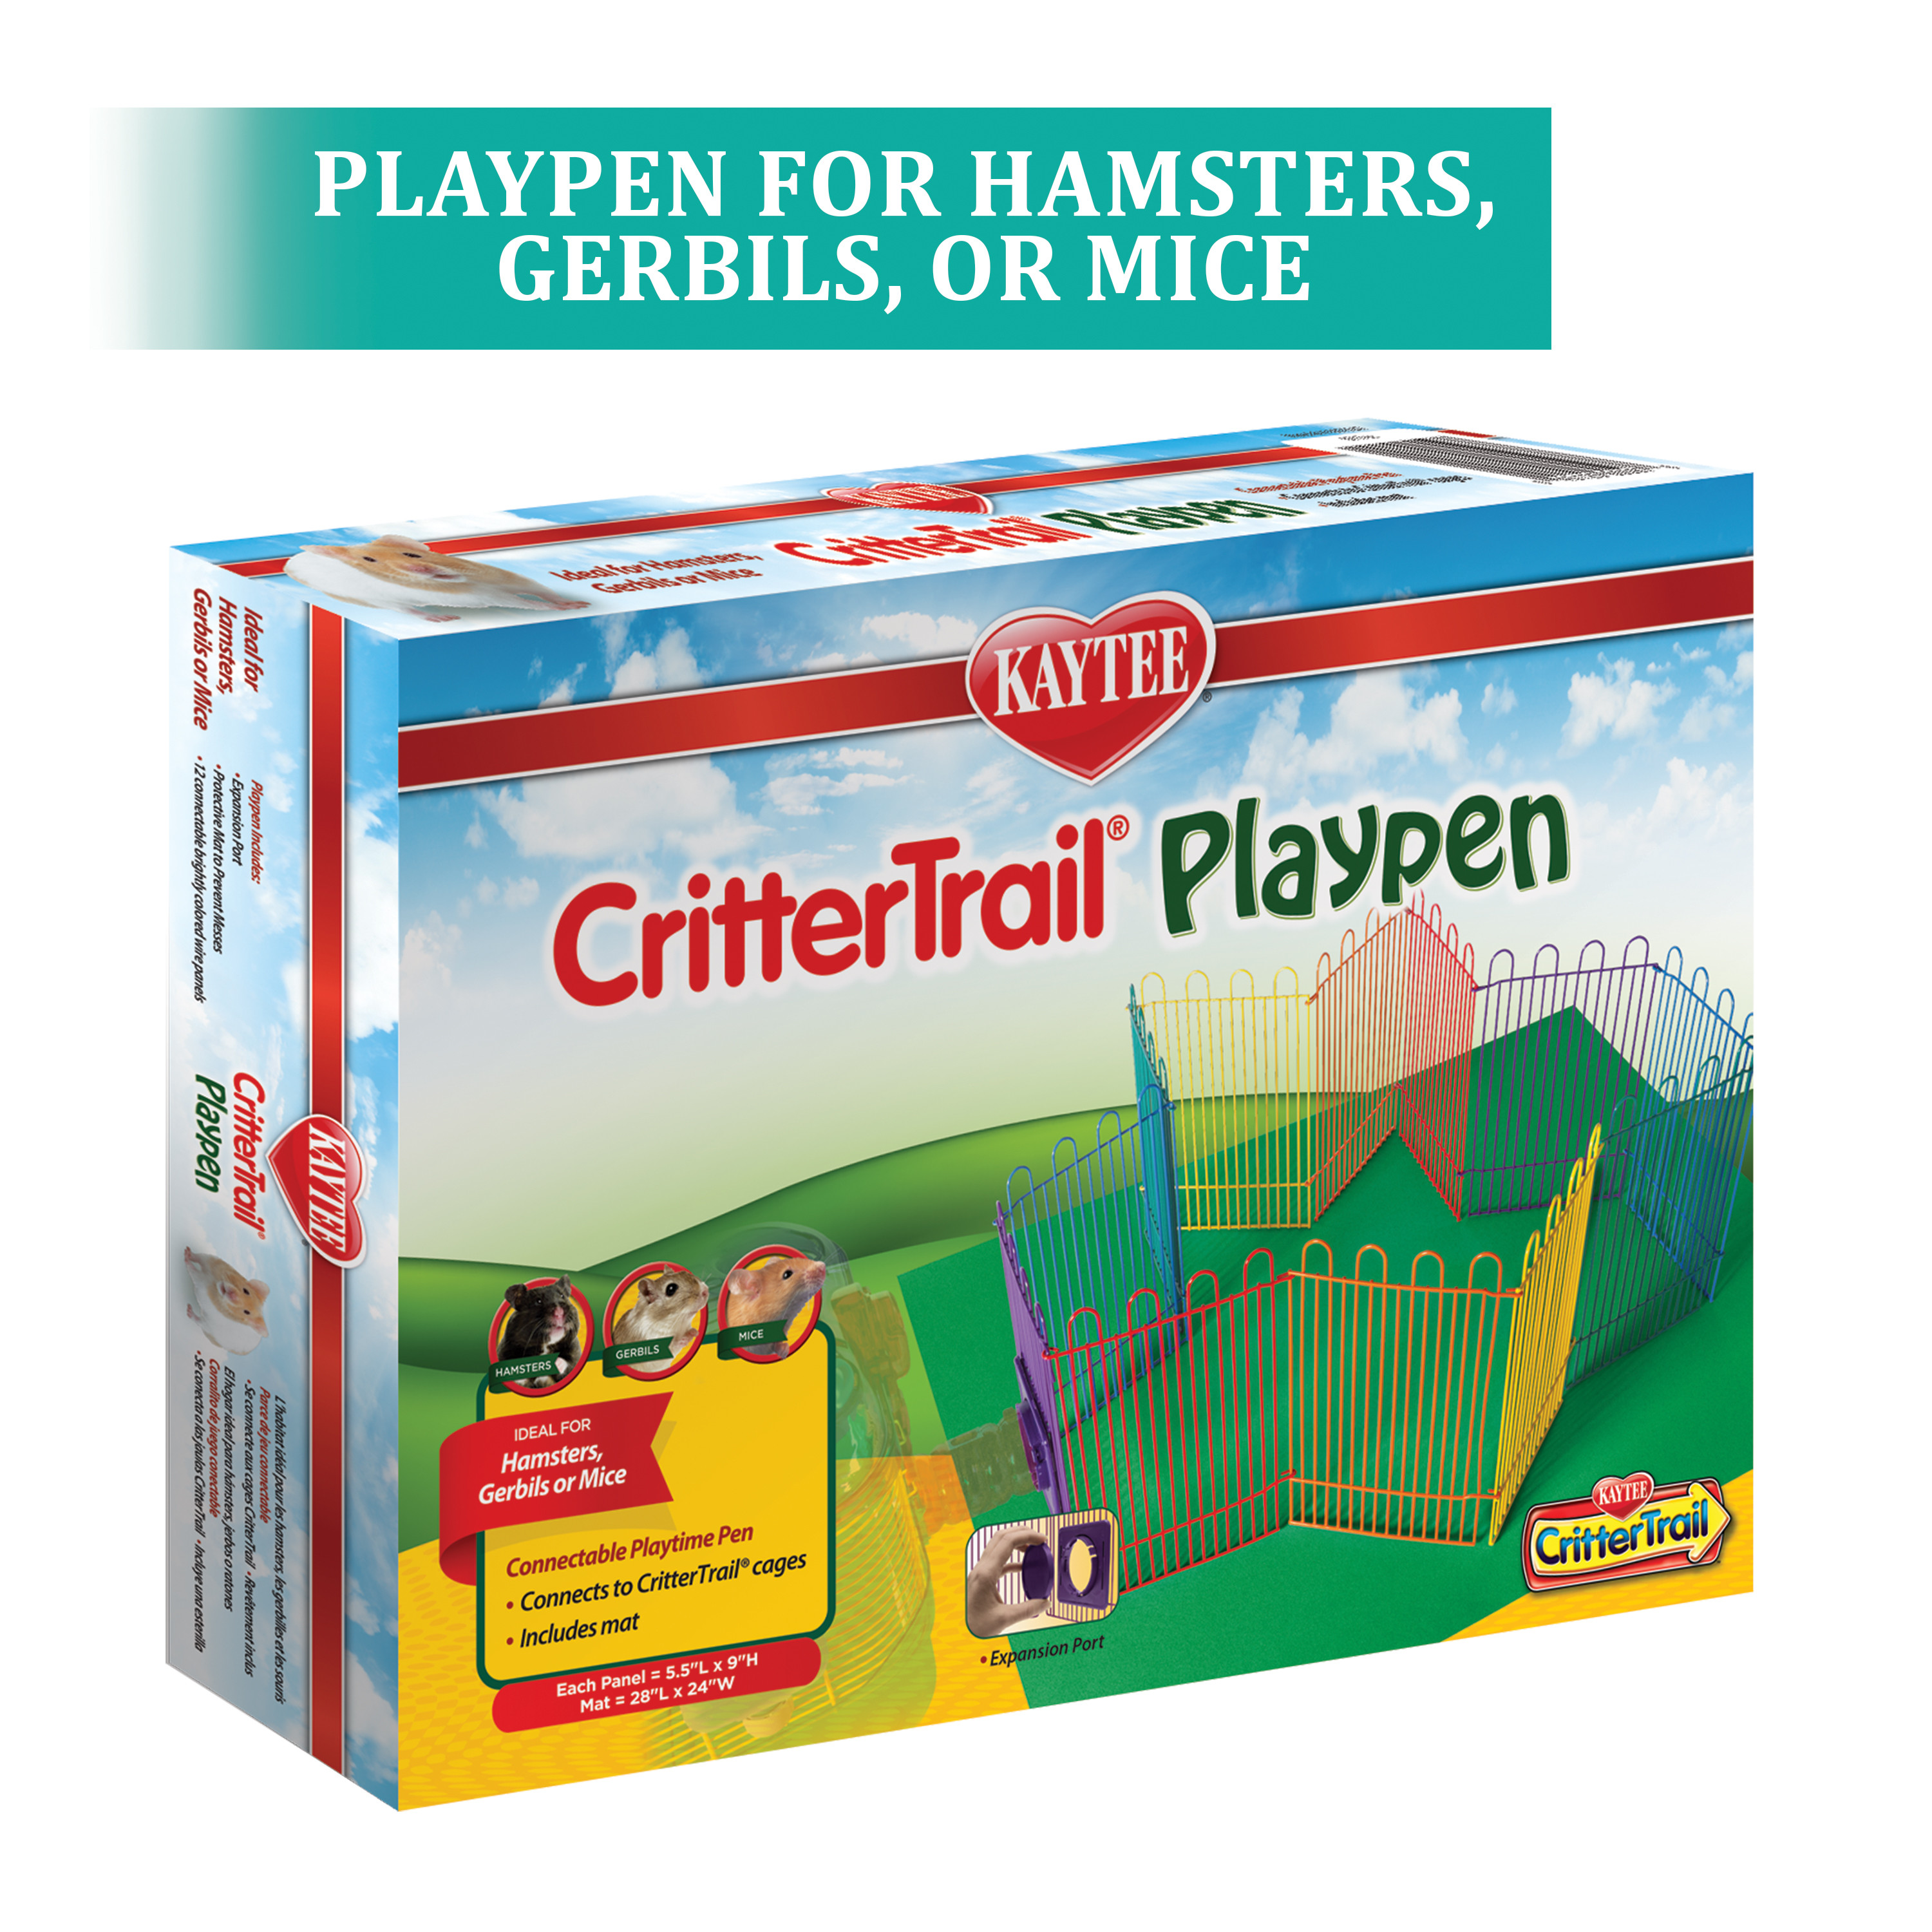 Kaytee Critter-Trail Playpen with Mat for Pet Gerbils, Hamsters or Mice - image 3 of 12